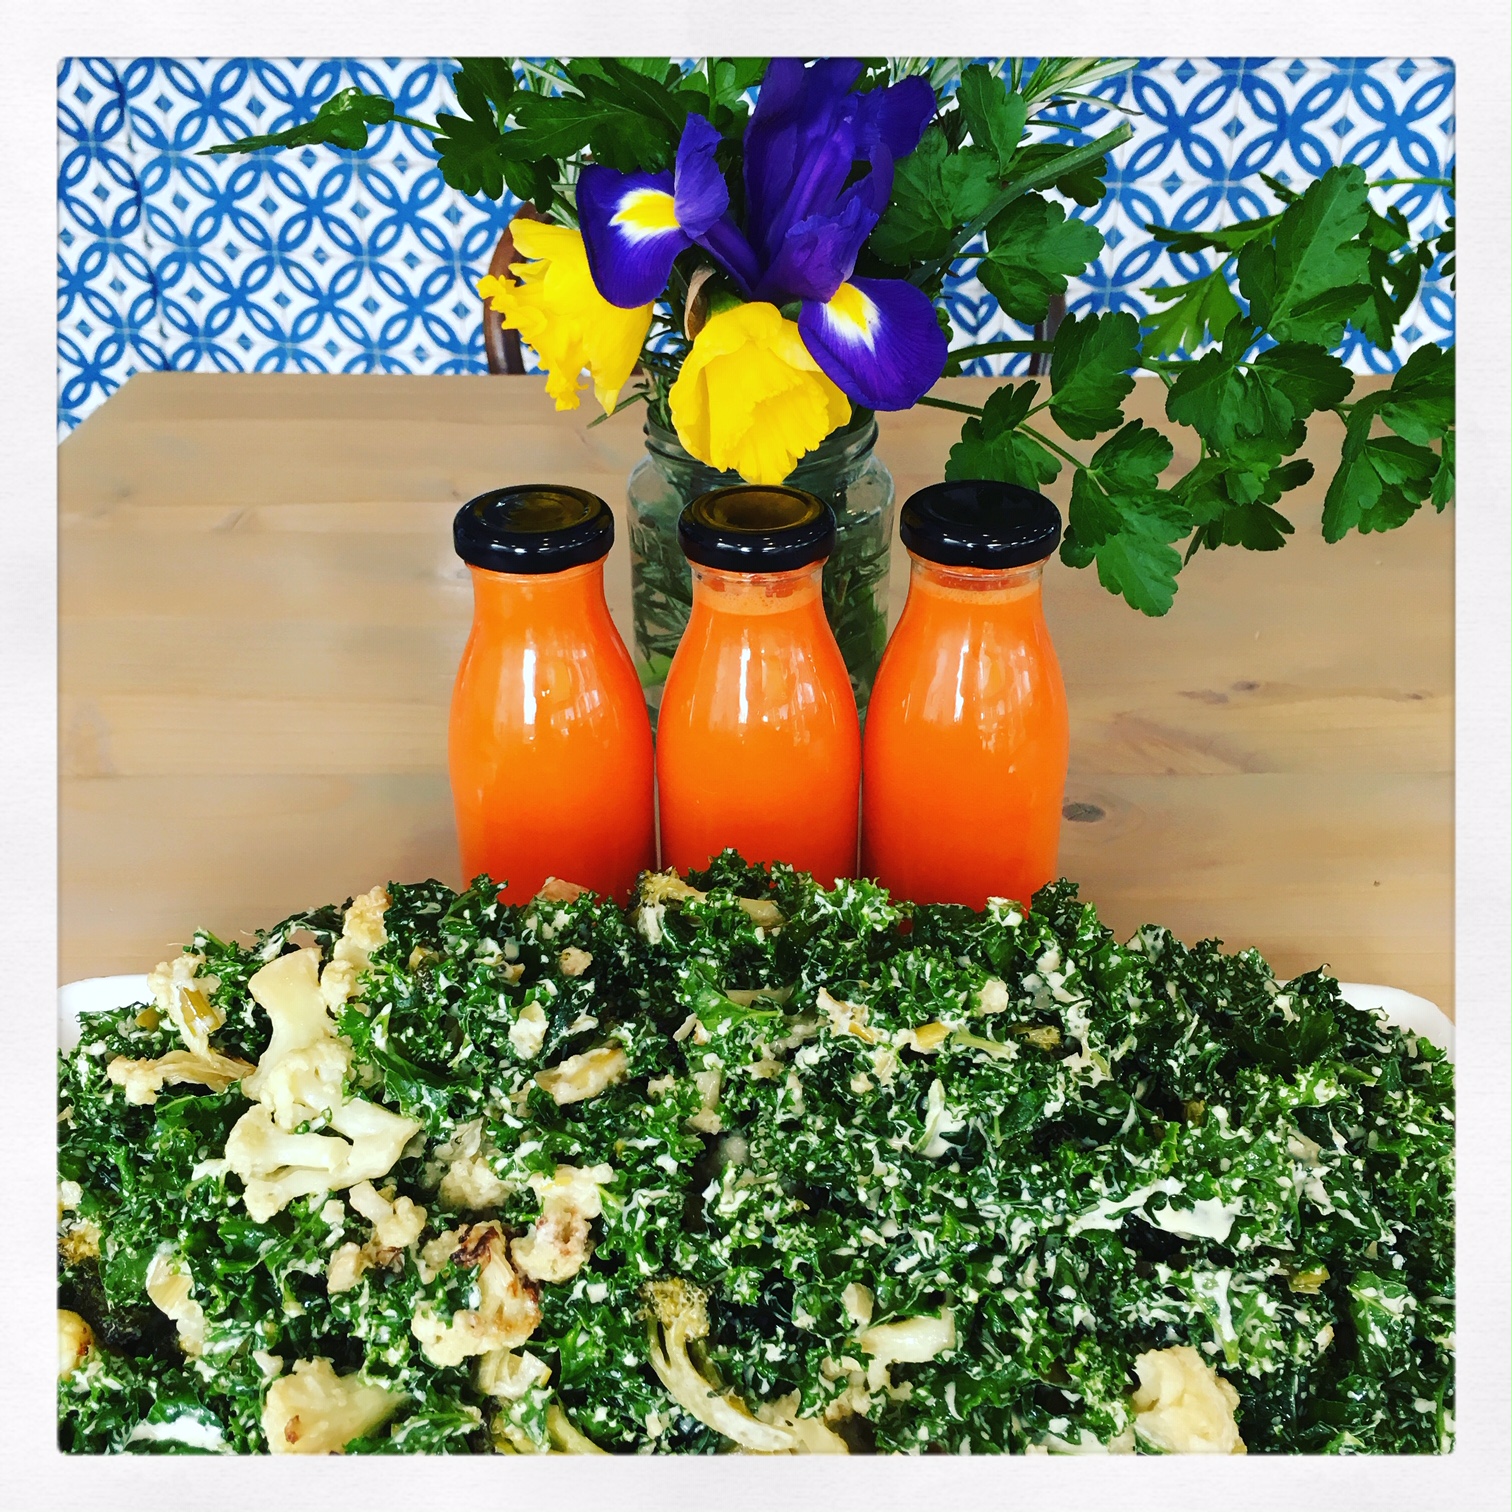 Kale Slaw and Slow pressed juices - No Grainer